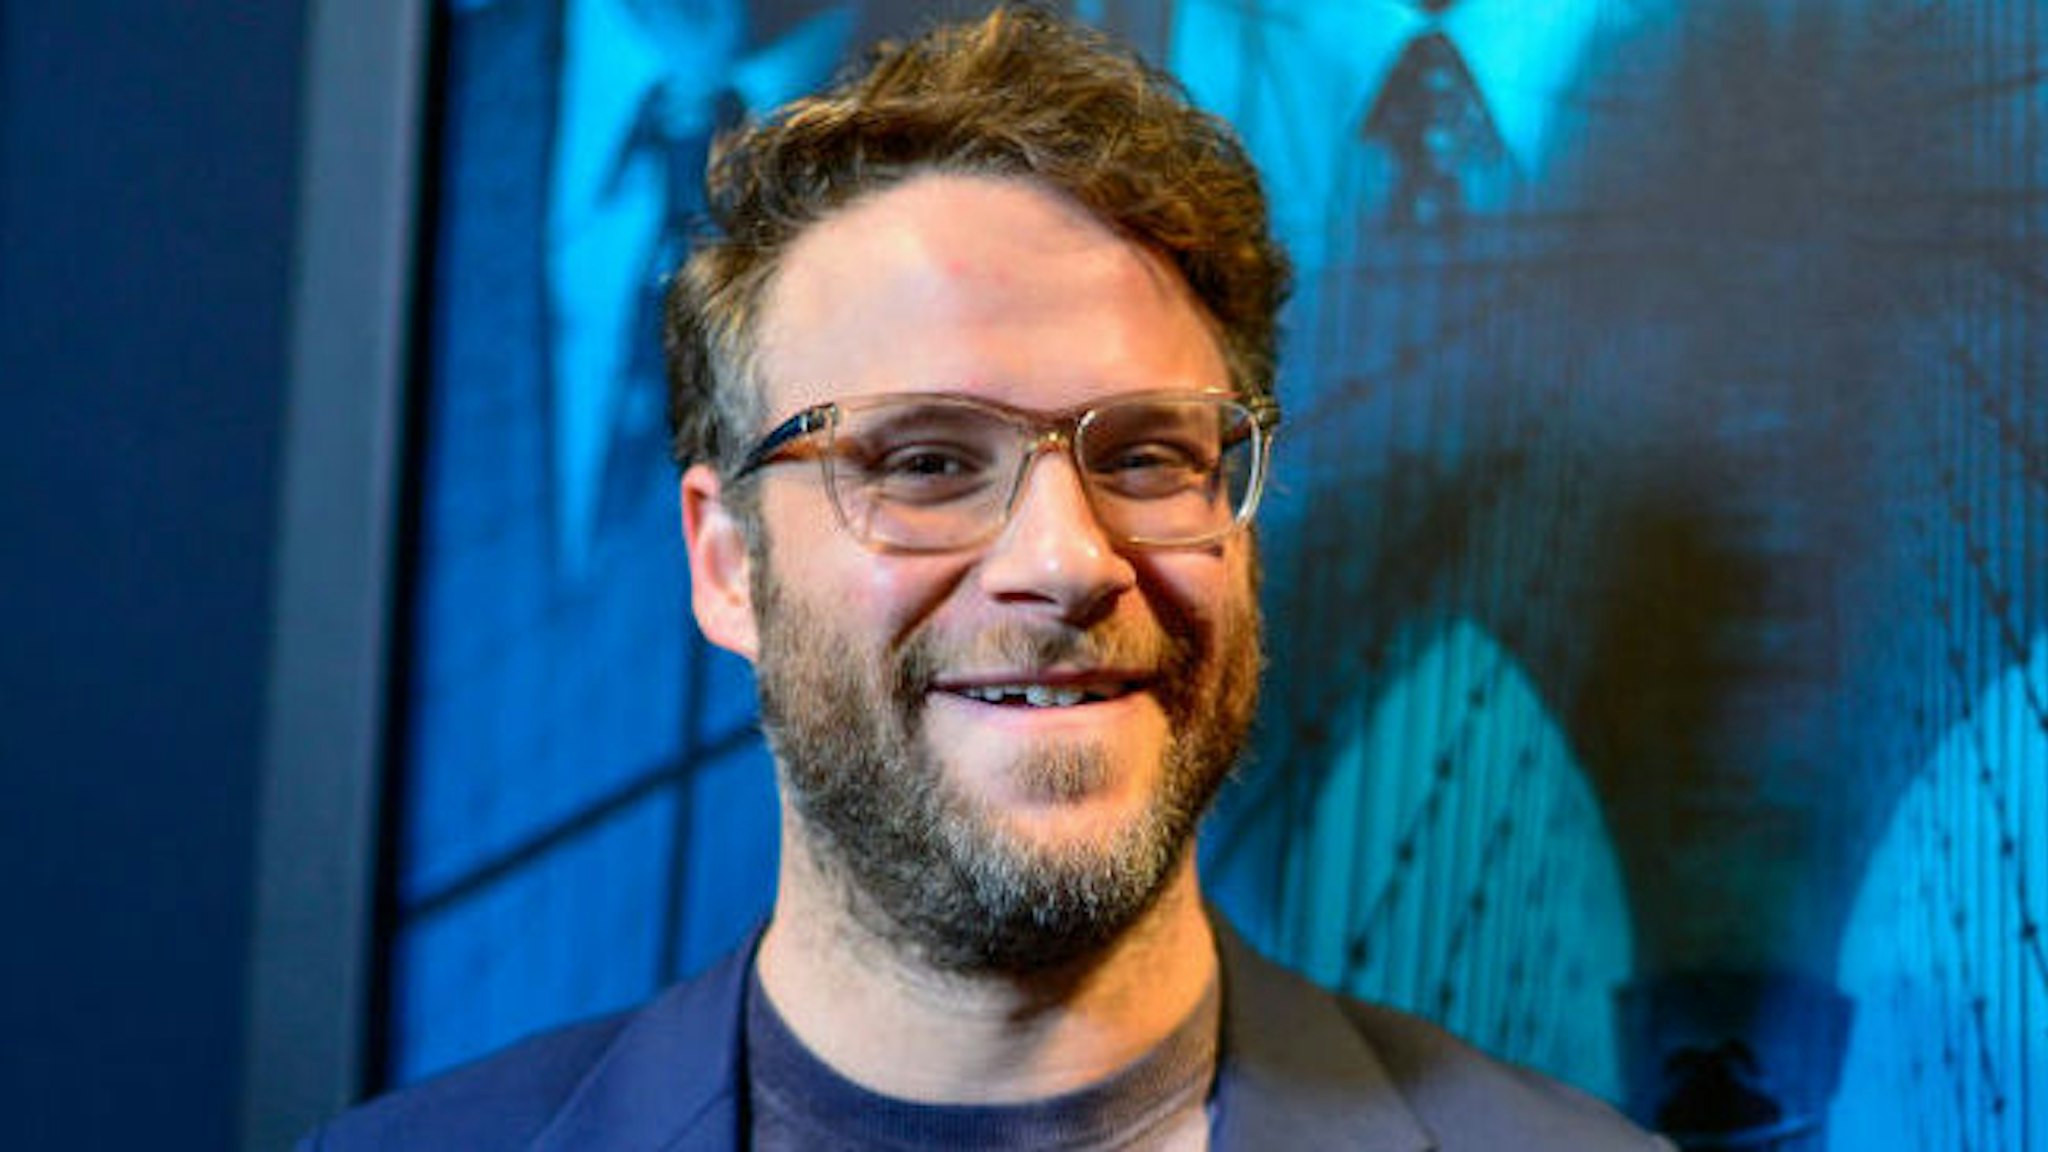 Seth Rogen arrives at Premiere Of Warner Bros Pictures' 'Motherless Brooklyn' on October 28, 2019 in Los Angeles, California. (Photo by Jerod Harris/Getty Images)